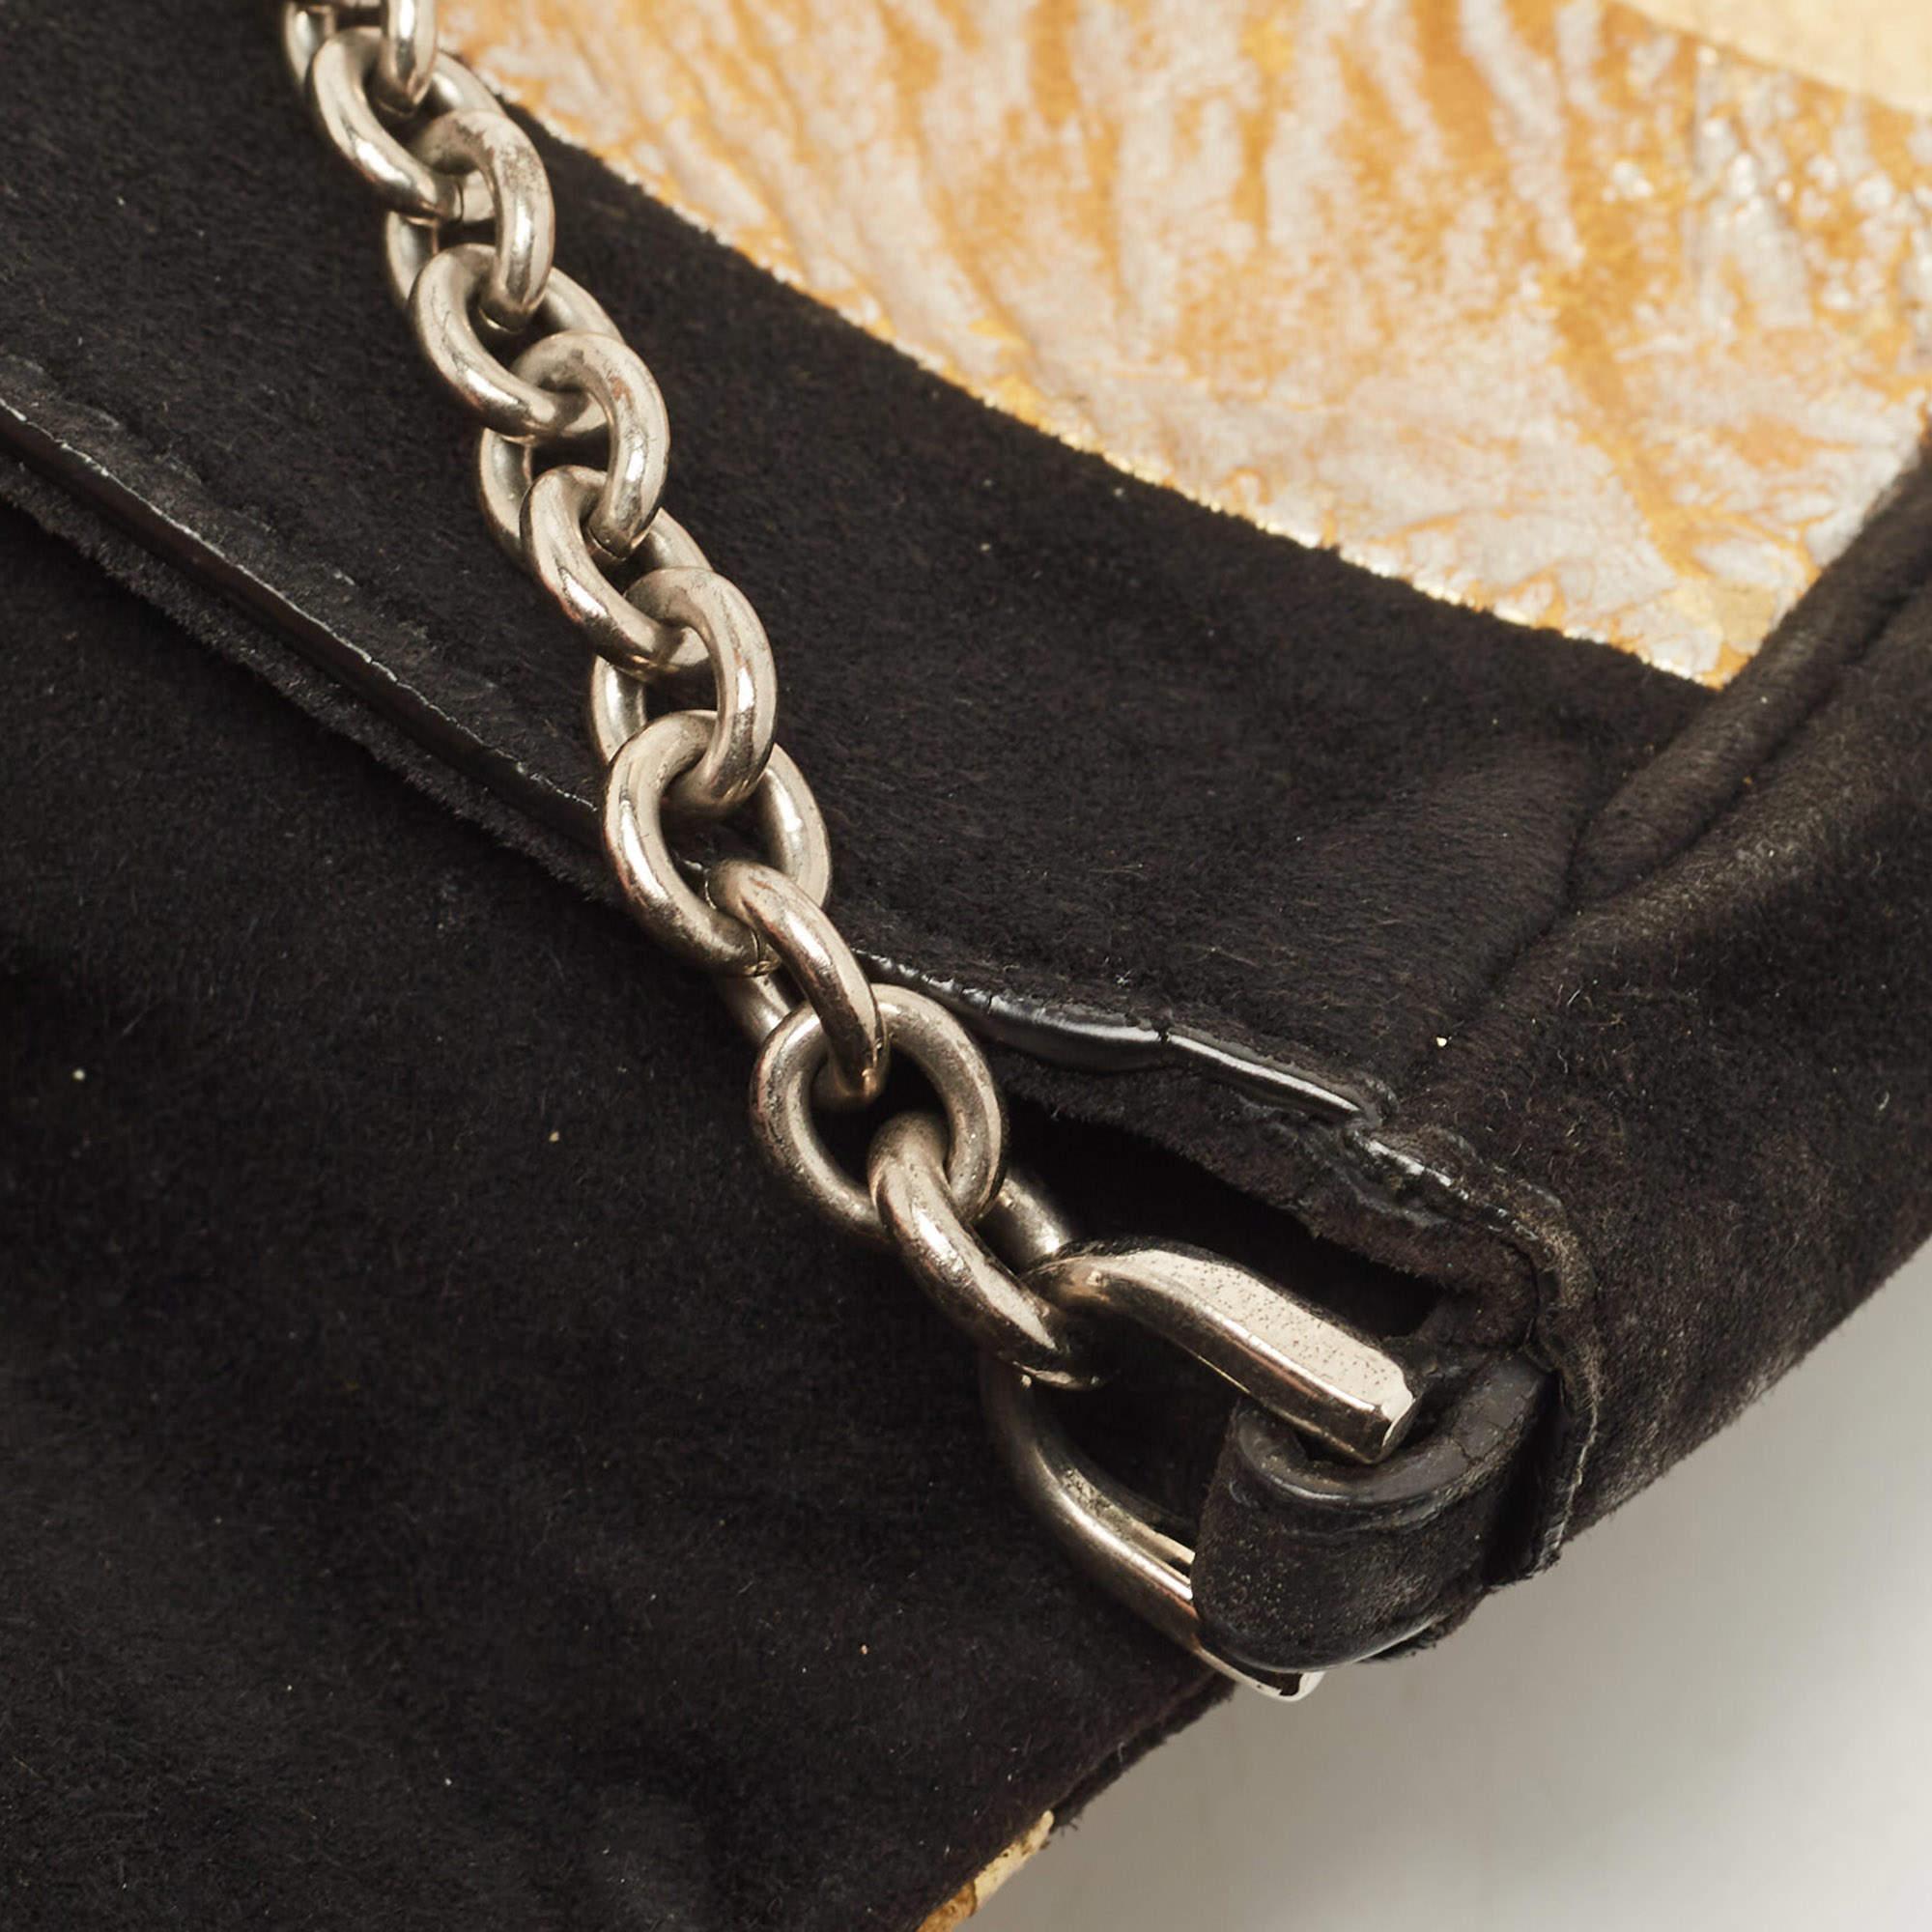 Dolce & Gabbana Black/Brown Suede And Snakeskin Leather Chain Clutch 7